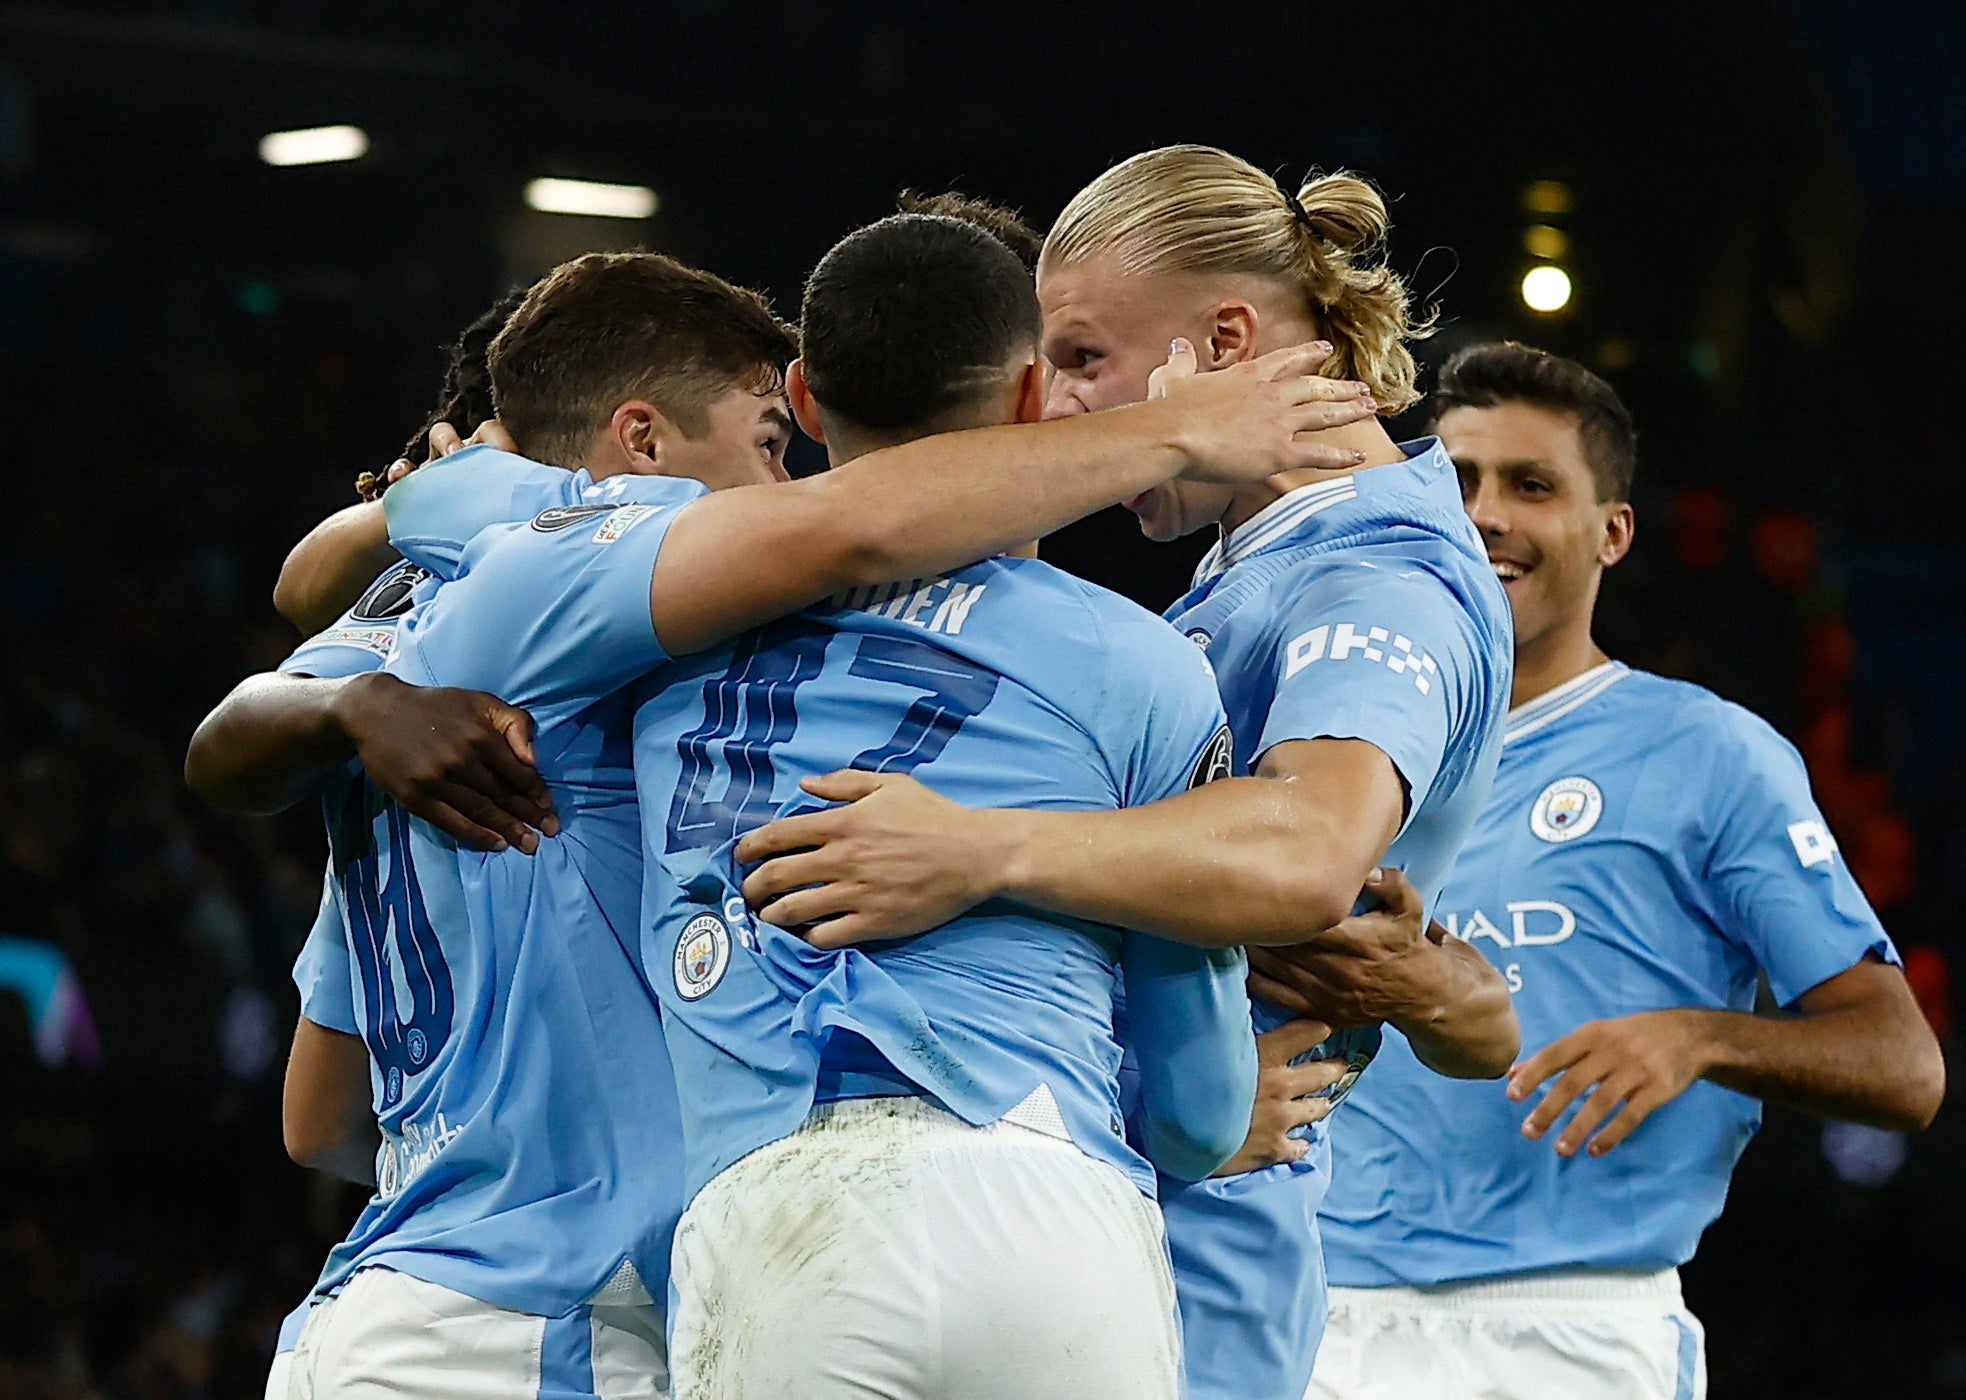 Man City 3-1 Red Star Belgrade: Champions League holders begin defence with  comeback win, Football News